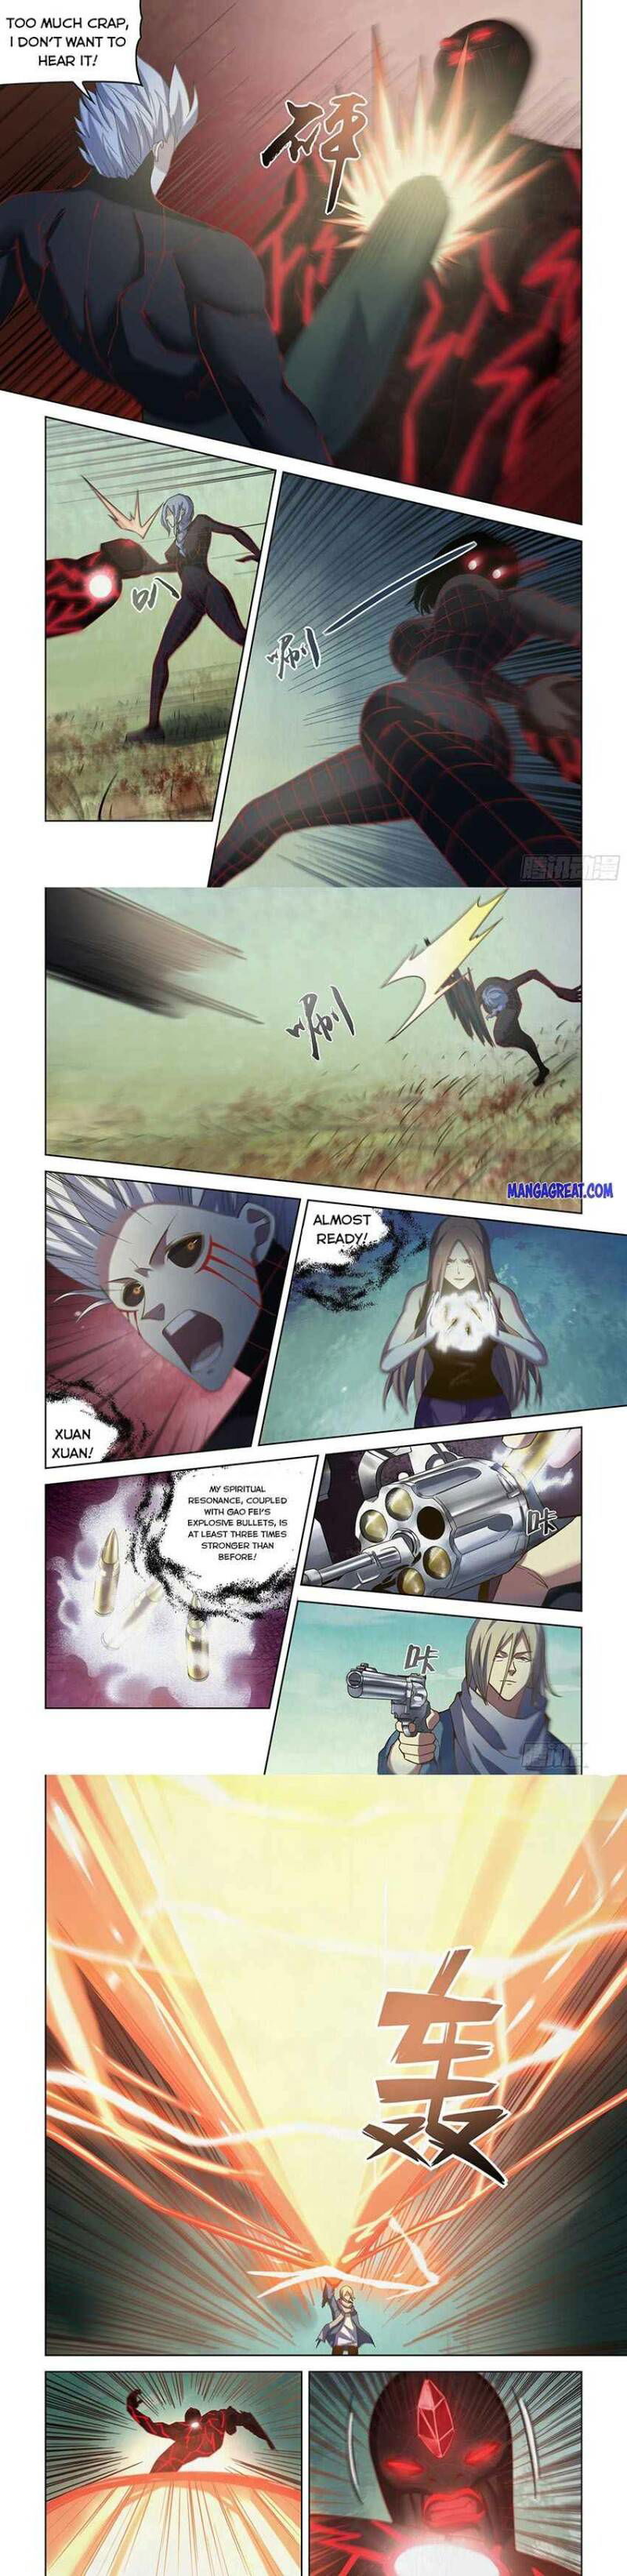 The Last Human Chapter 412 page 4